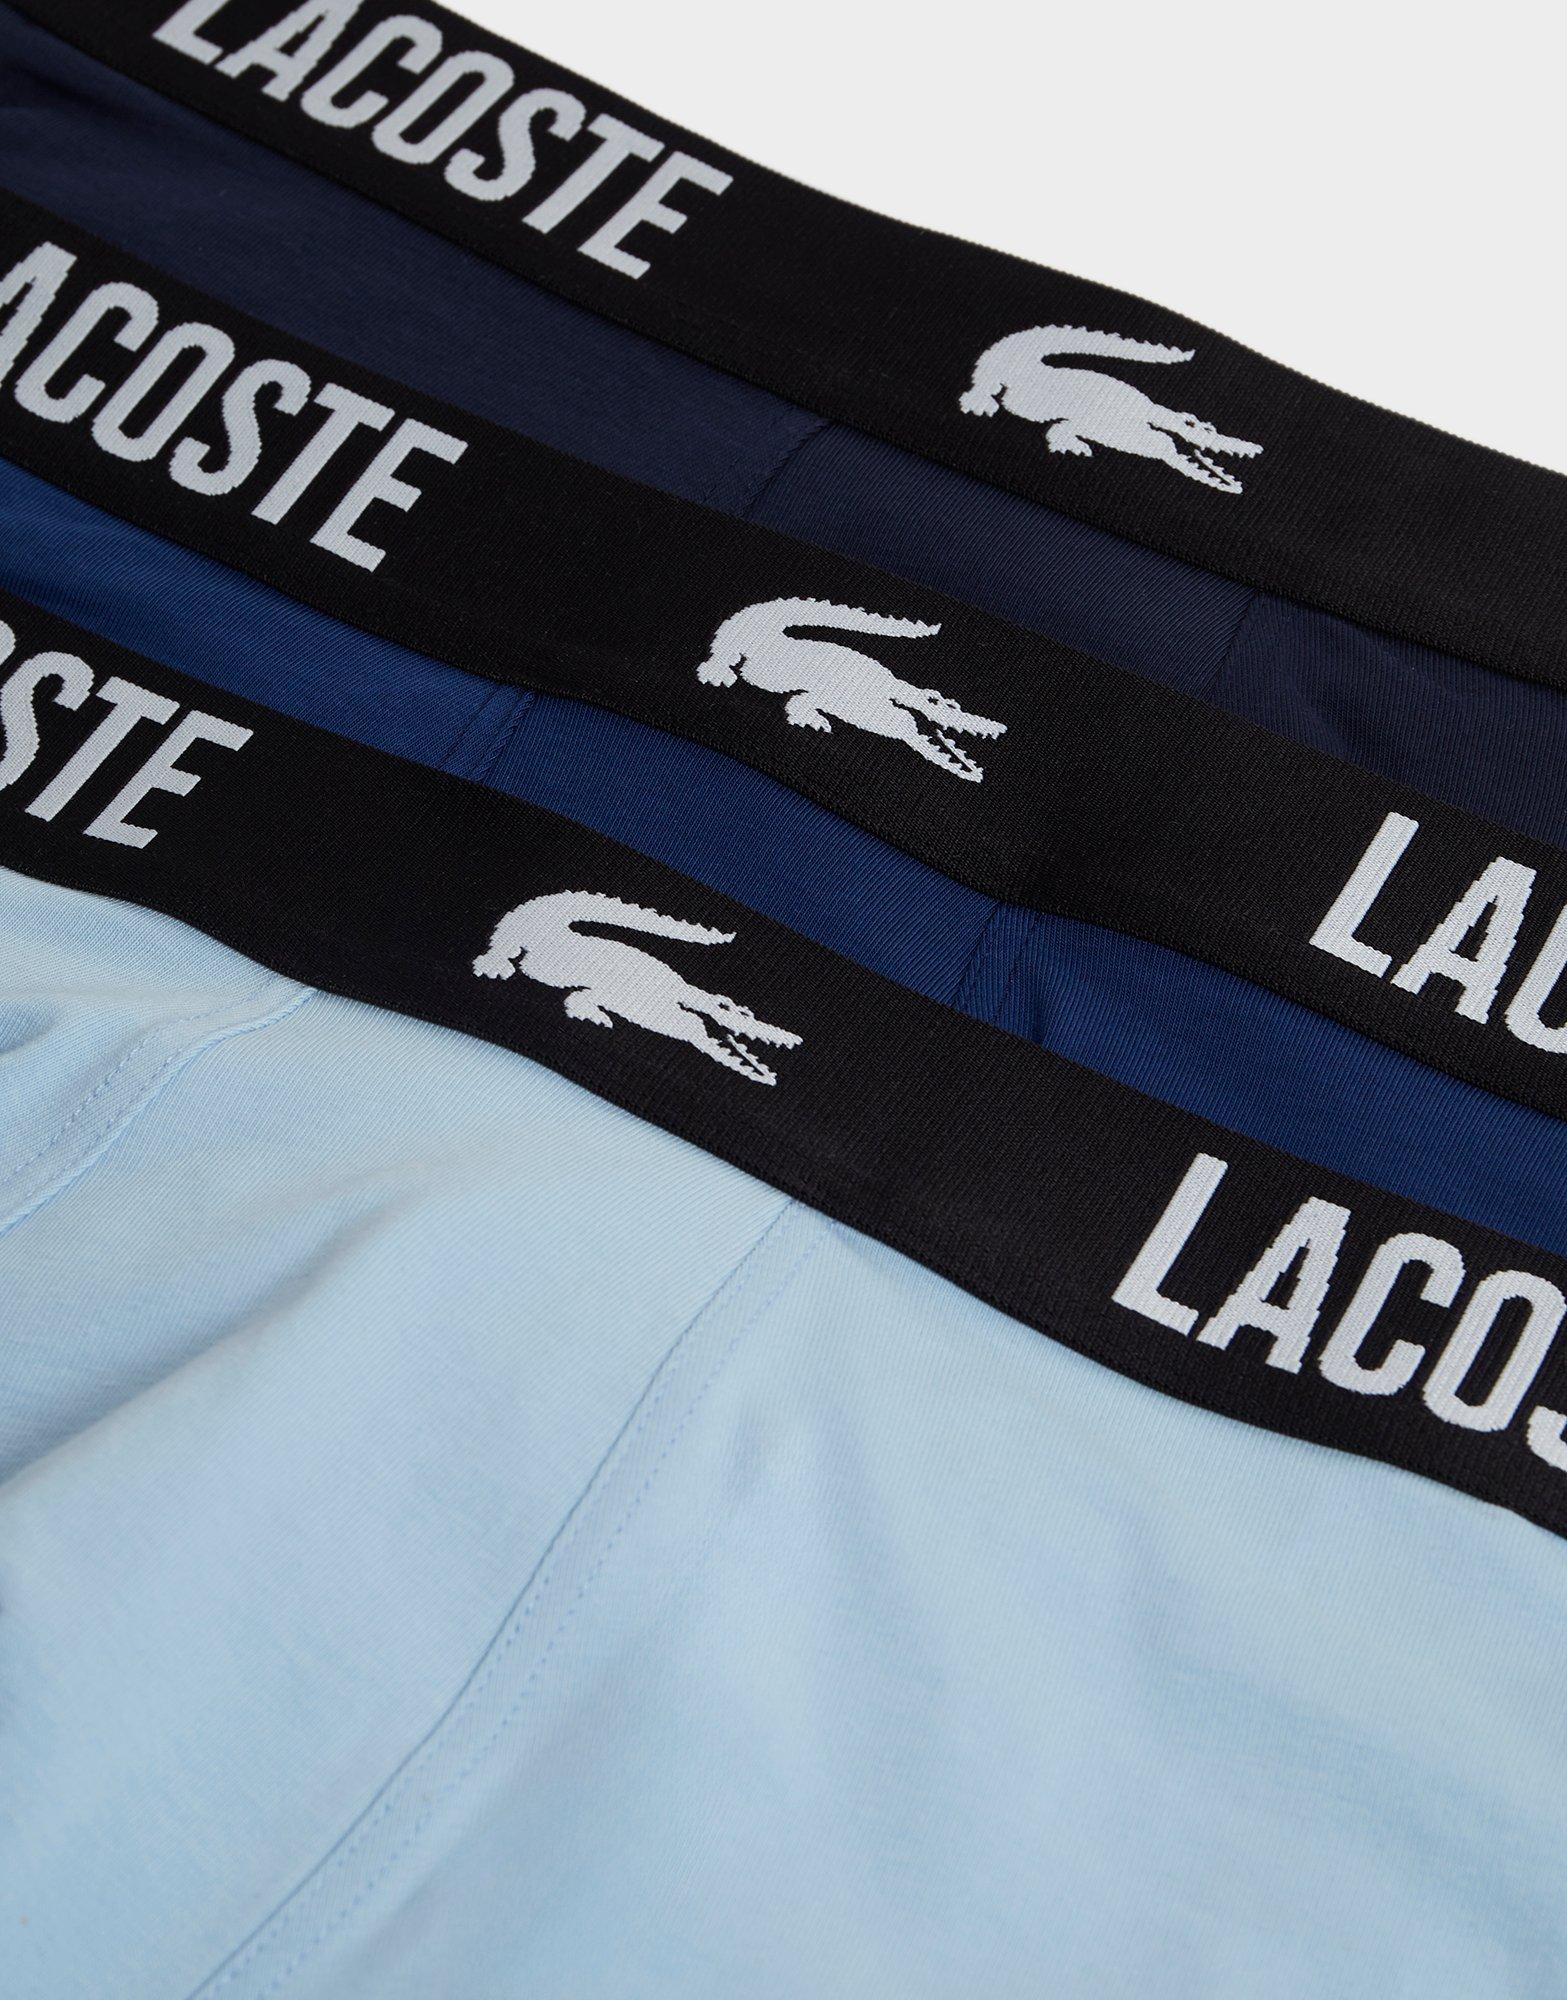 Boxers Lacoste Courts pack 3 Azul y blanco